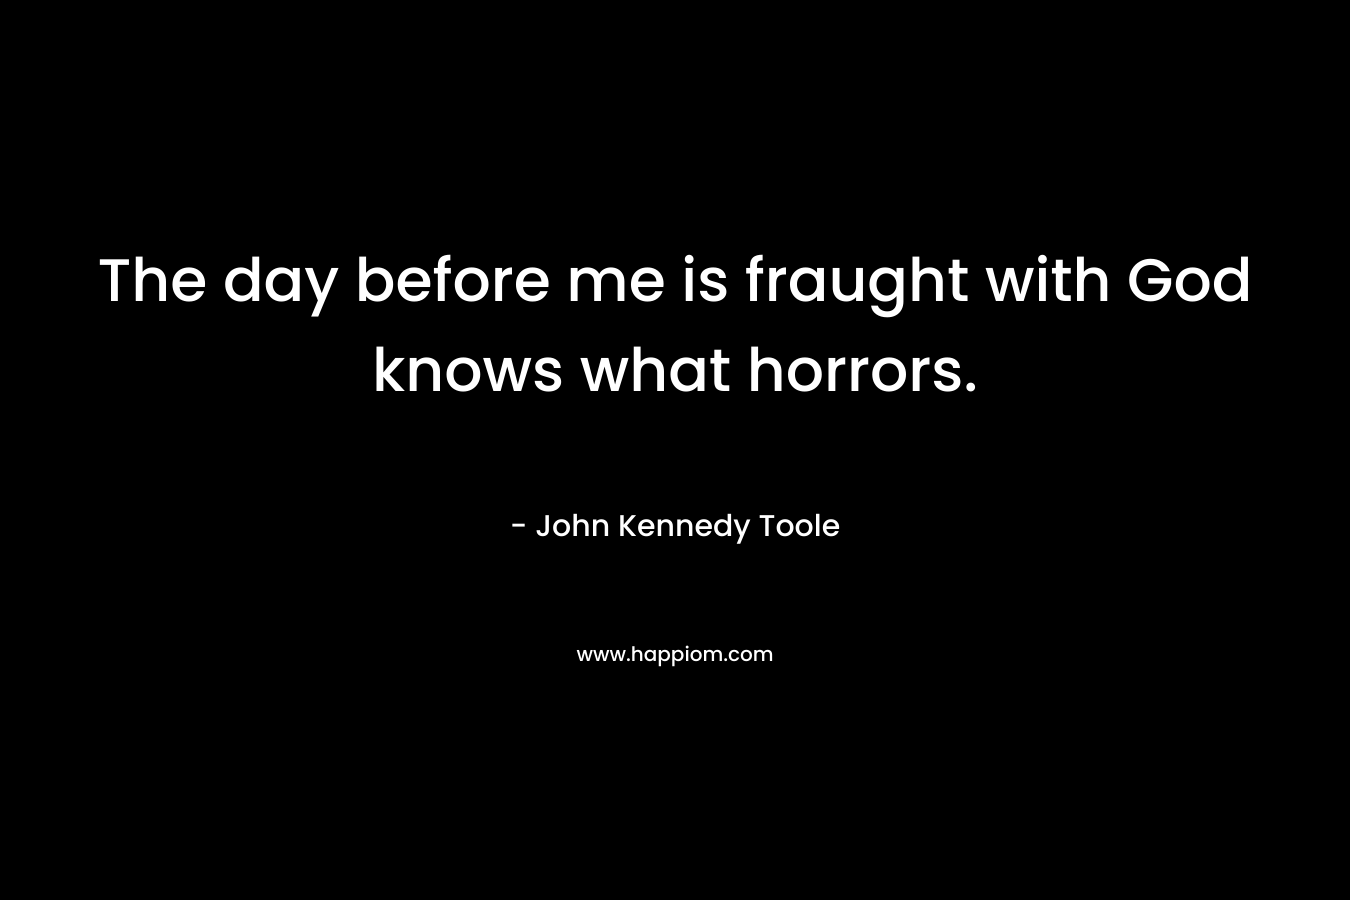 The day before me is fraught with God knows what horrors. – John Kennedy Toole